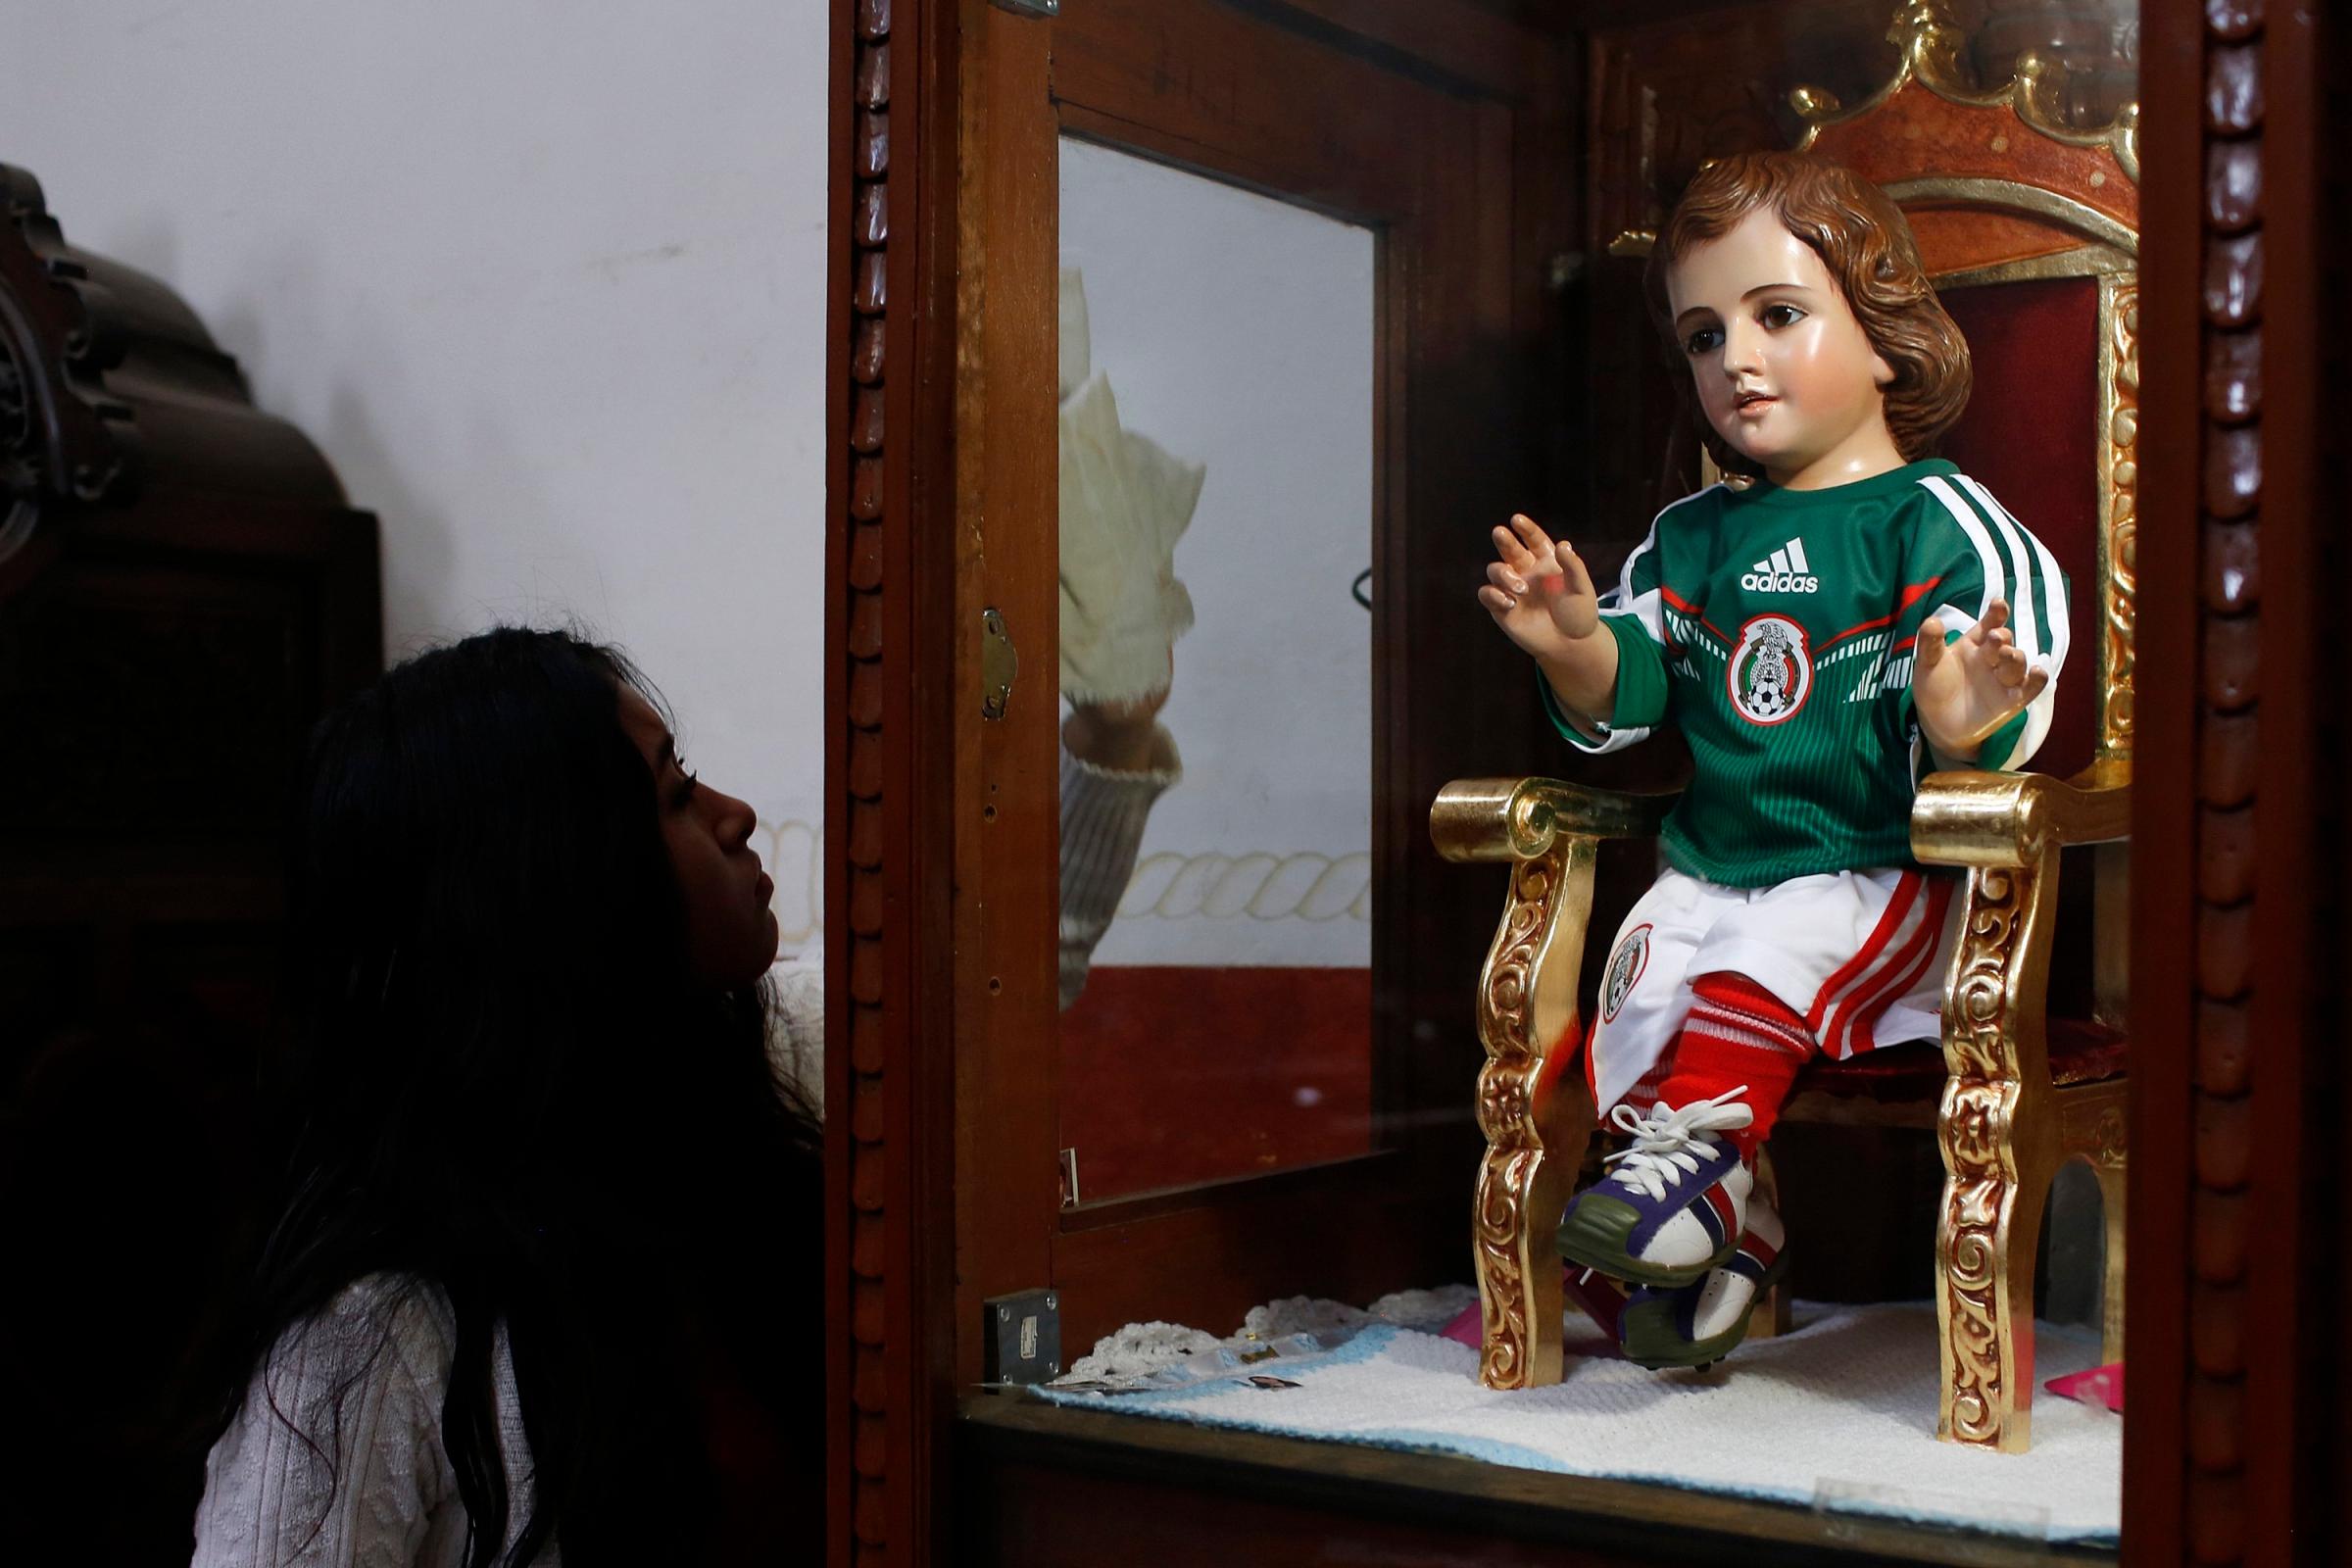 A woman cleans a glass cabinet with a baby Jesus statue dressed in a version of the national soccer team jersey at a church in Mexico City on June 12, 2014.